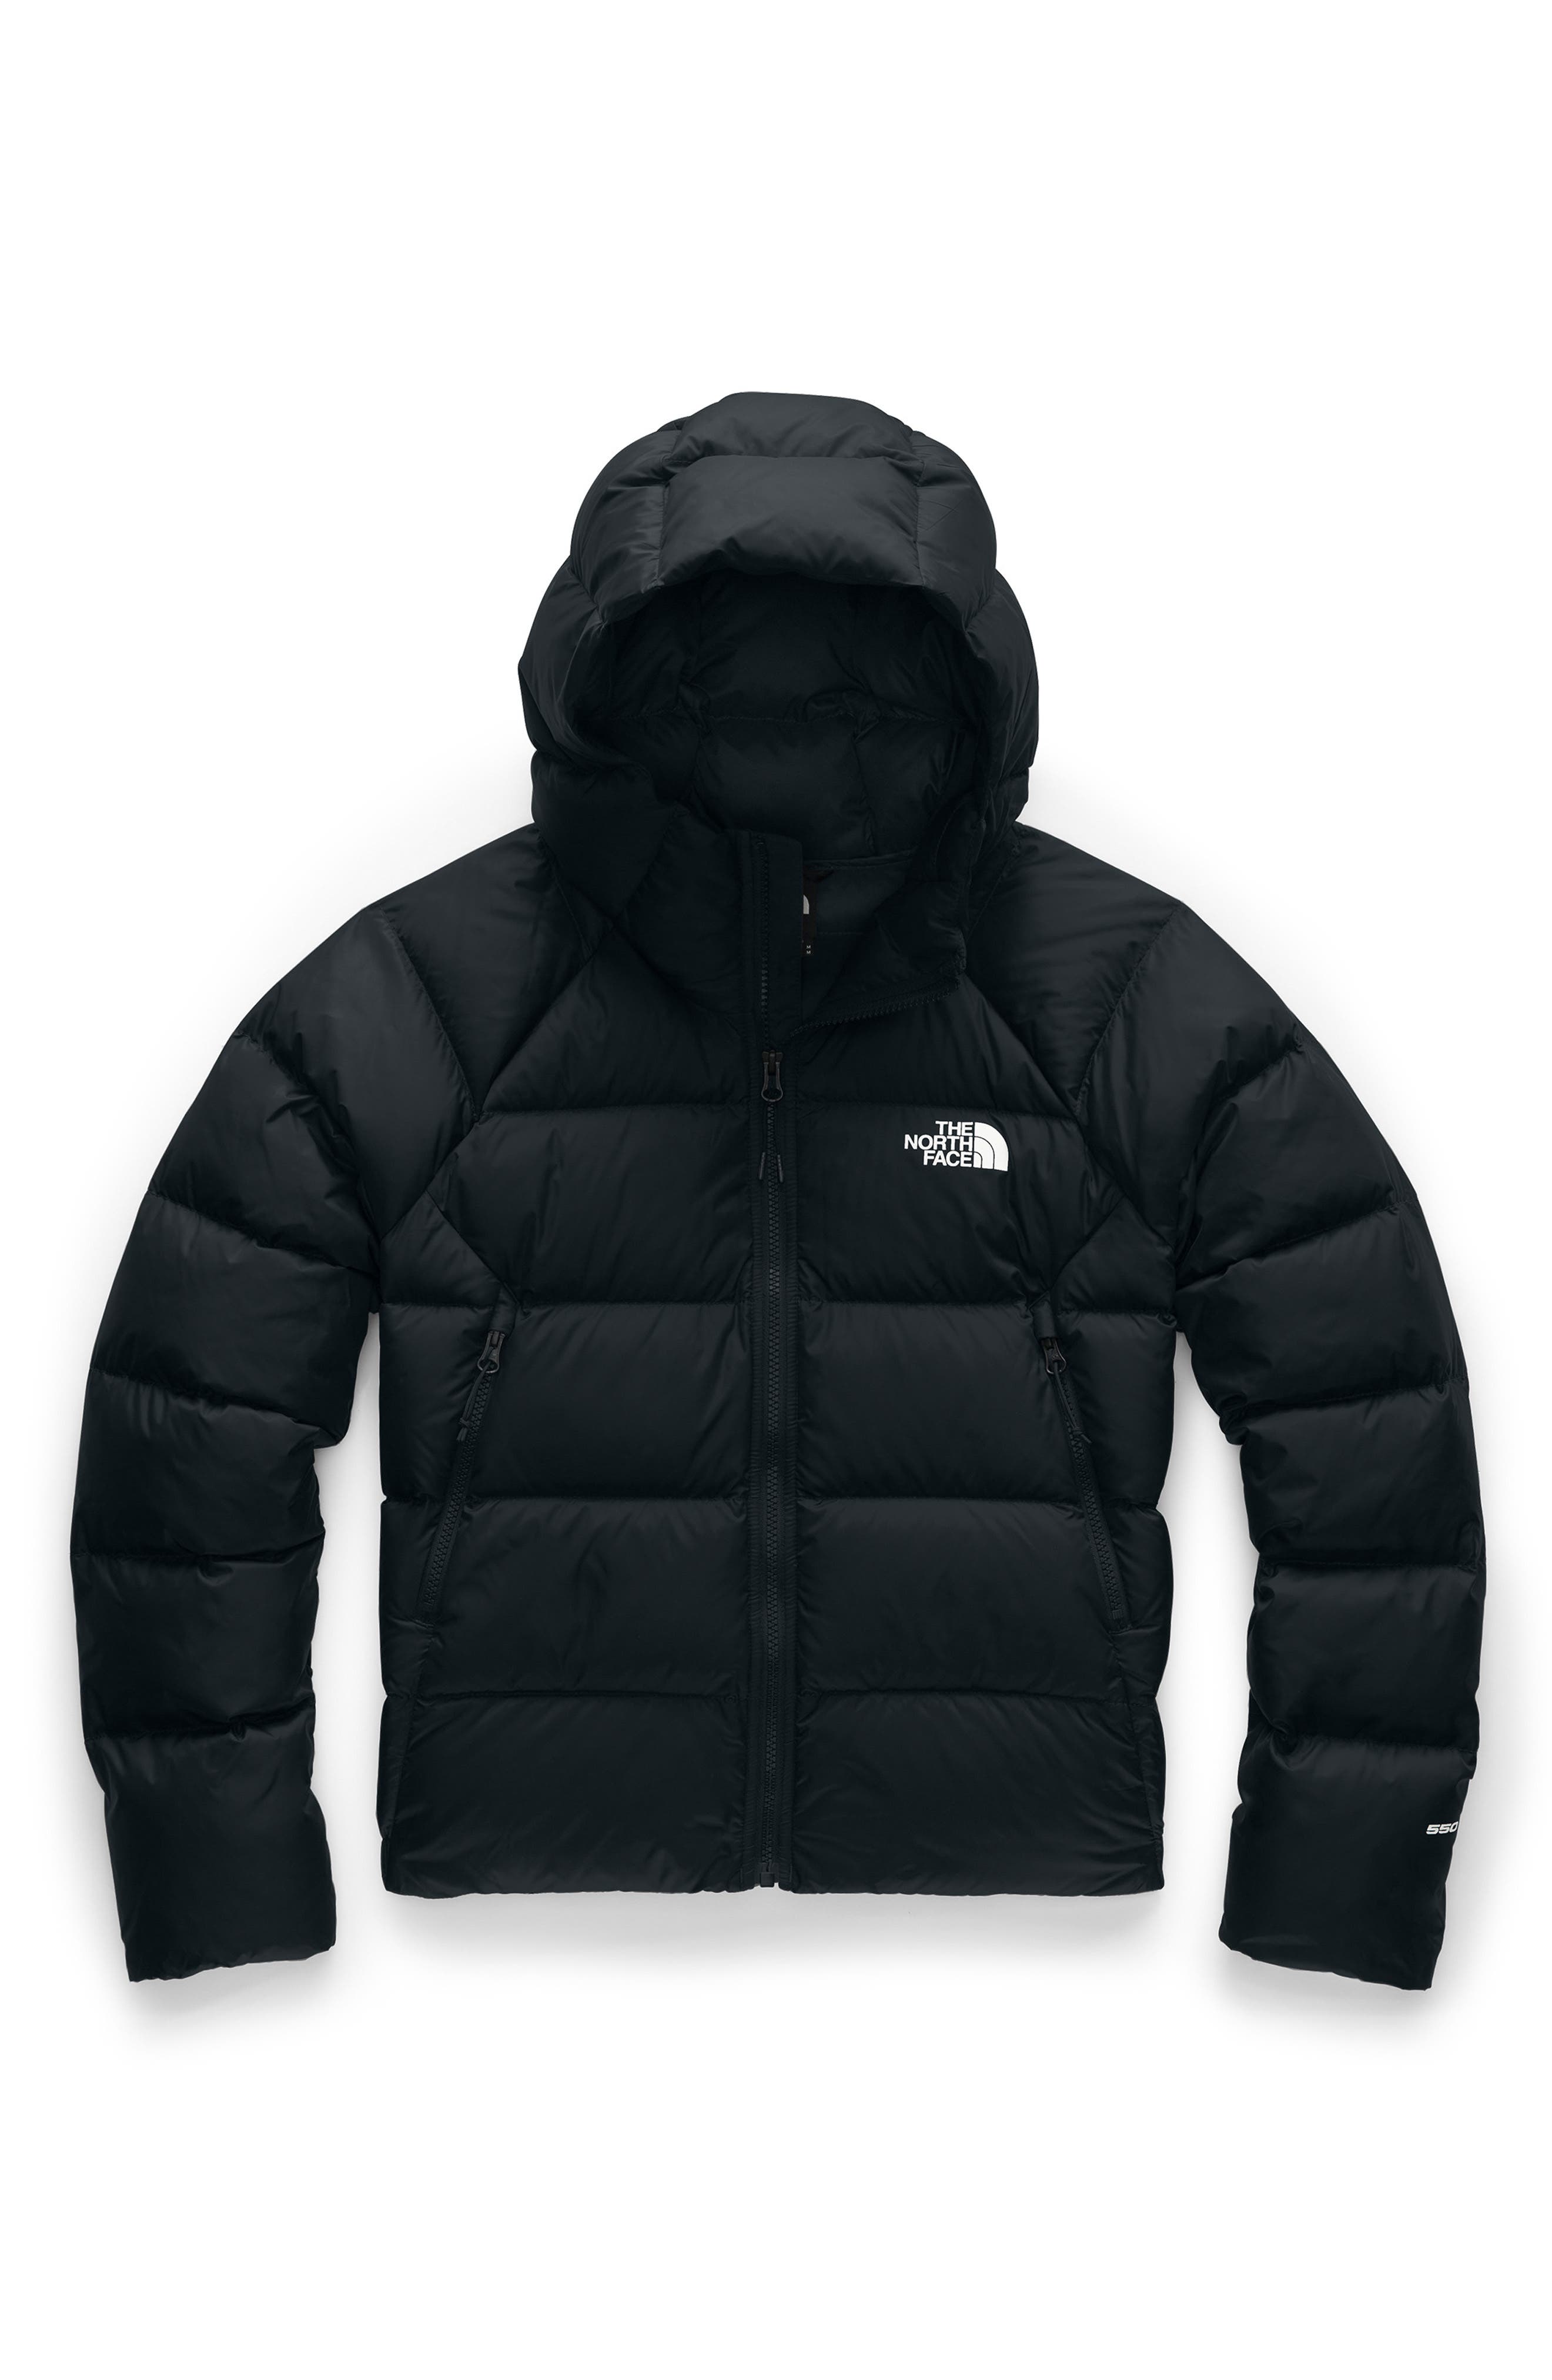 the north face jacket 550